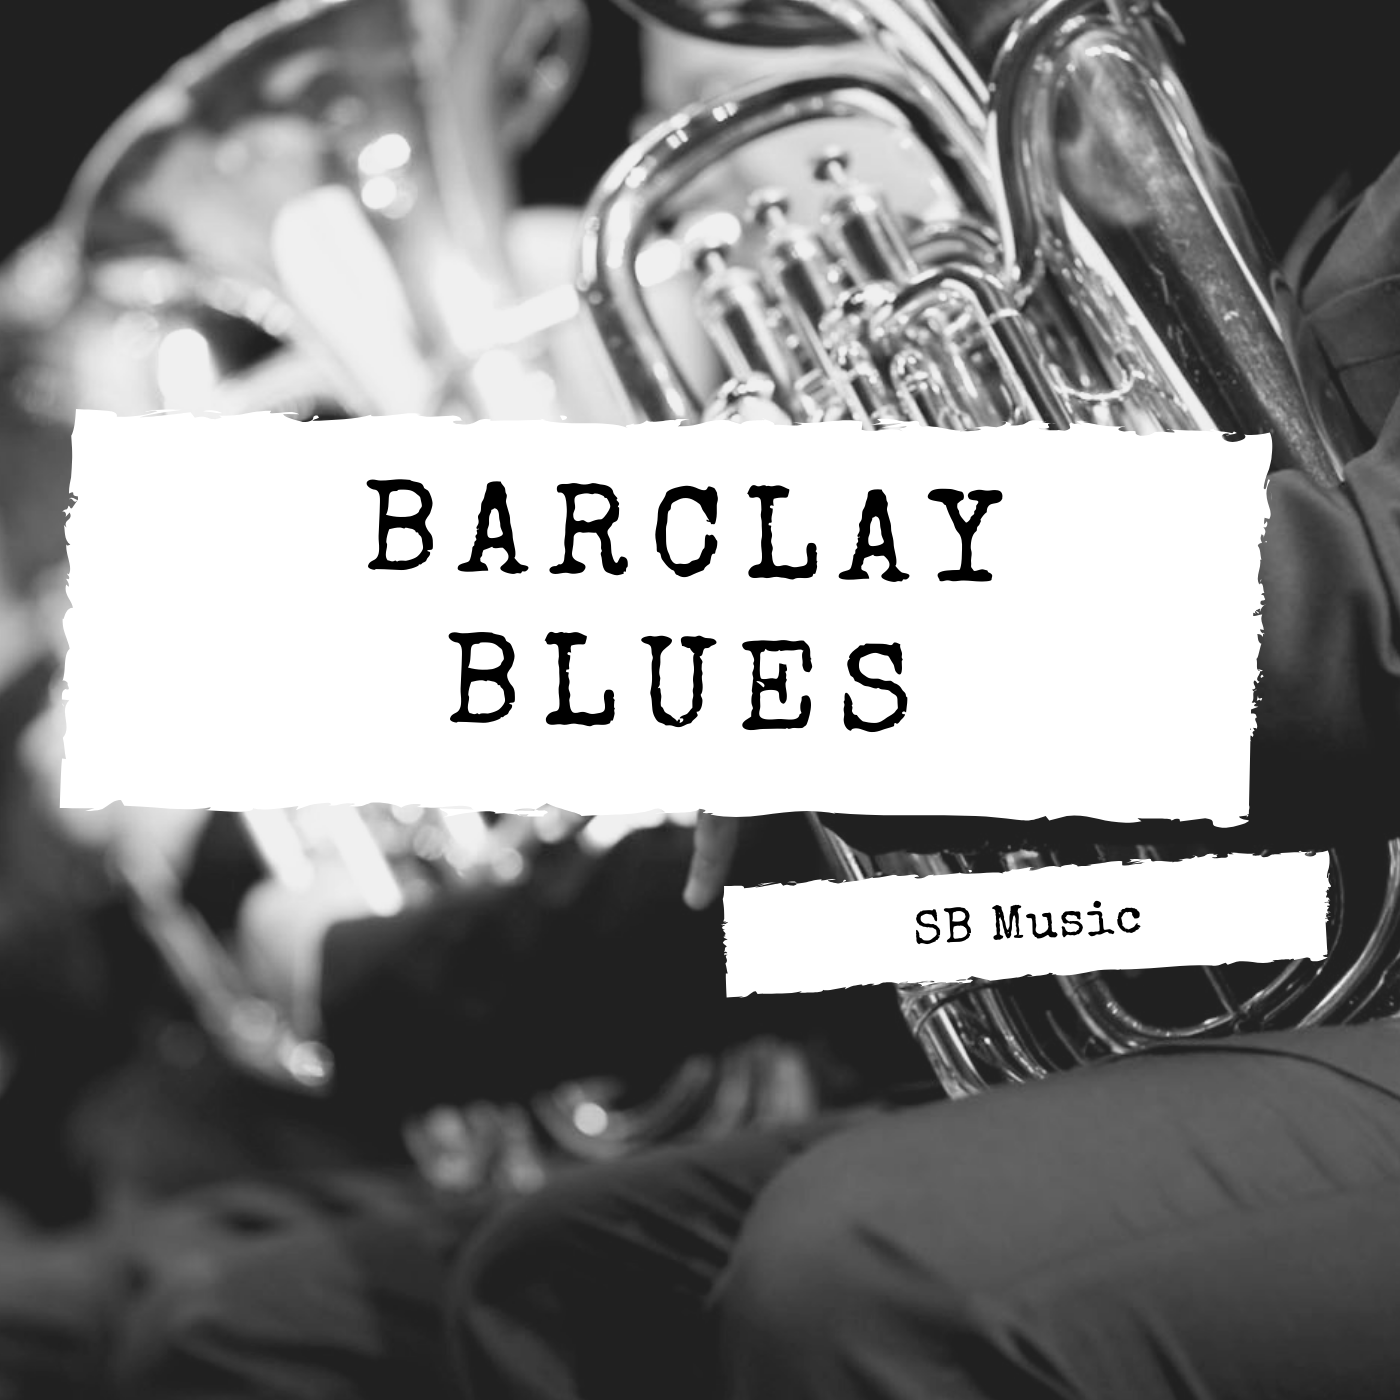 Barclay Blues - Baritone or Euphonium Solo with Brass Band - Steven Booth 